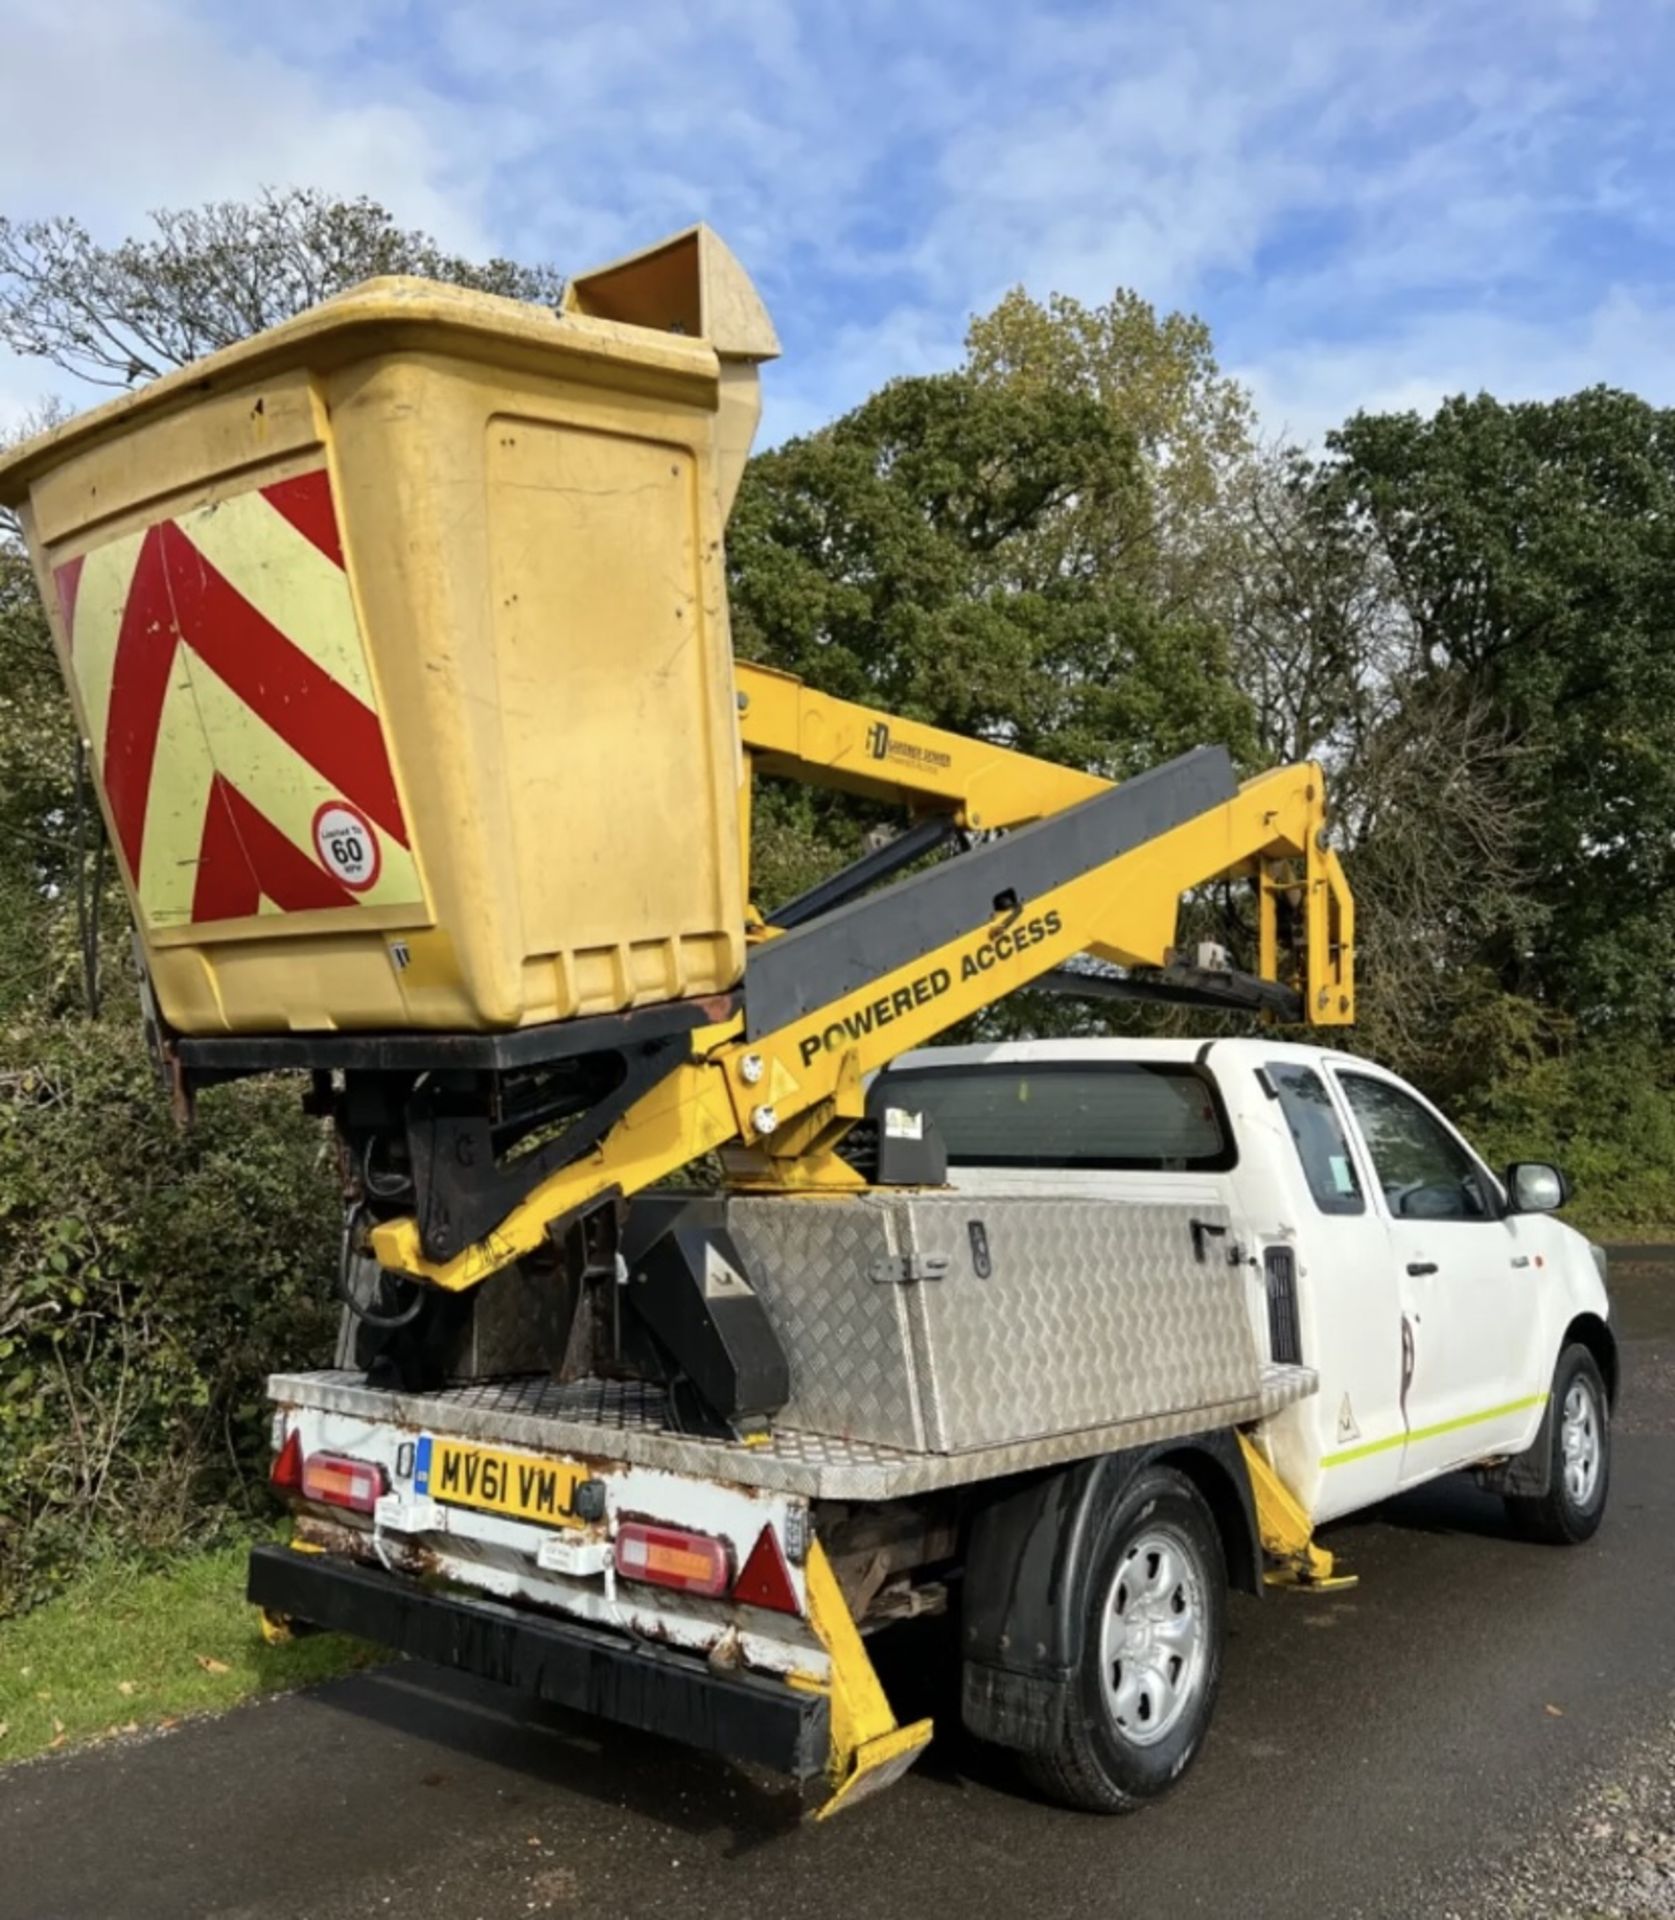 TOYOTA HILUX CHERRY PICKER 2012 - Image 5 of 8